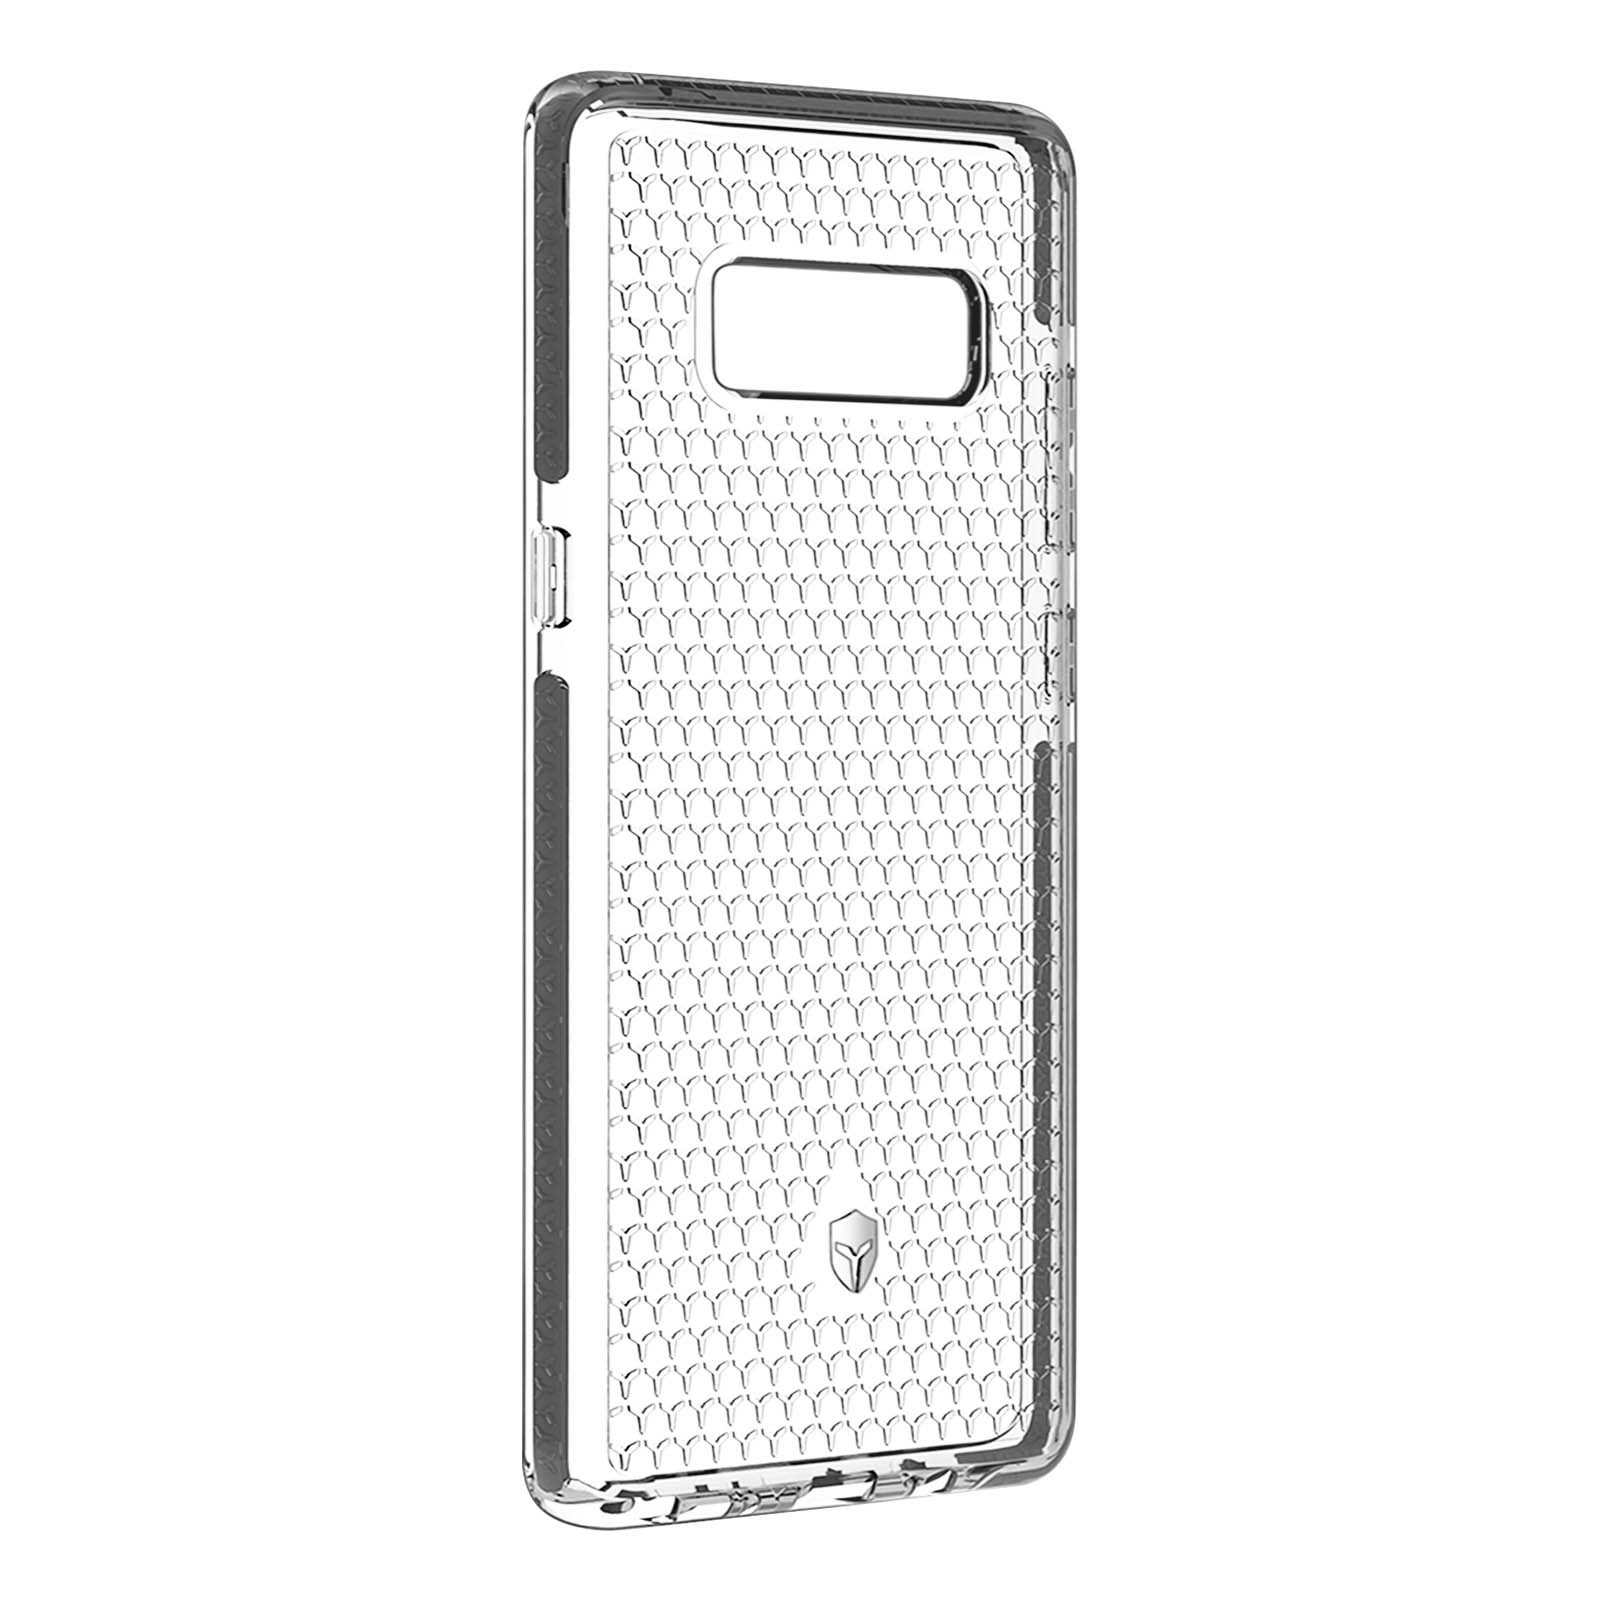 CASE Backcover, Note Galaxy mit Samsung, Life FORCE Tryax-System 8, Transparent Series,